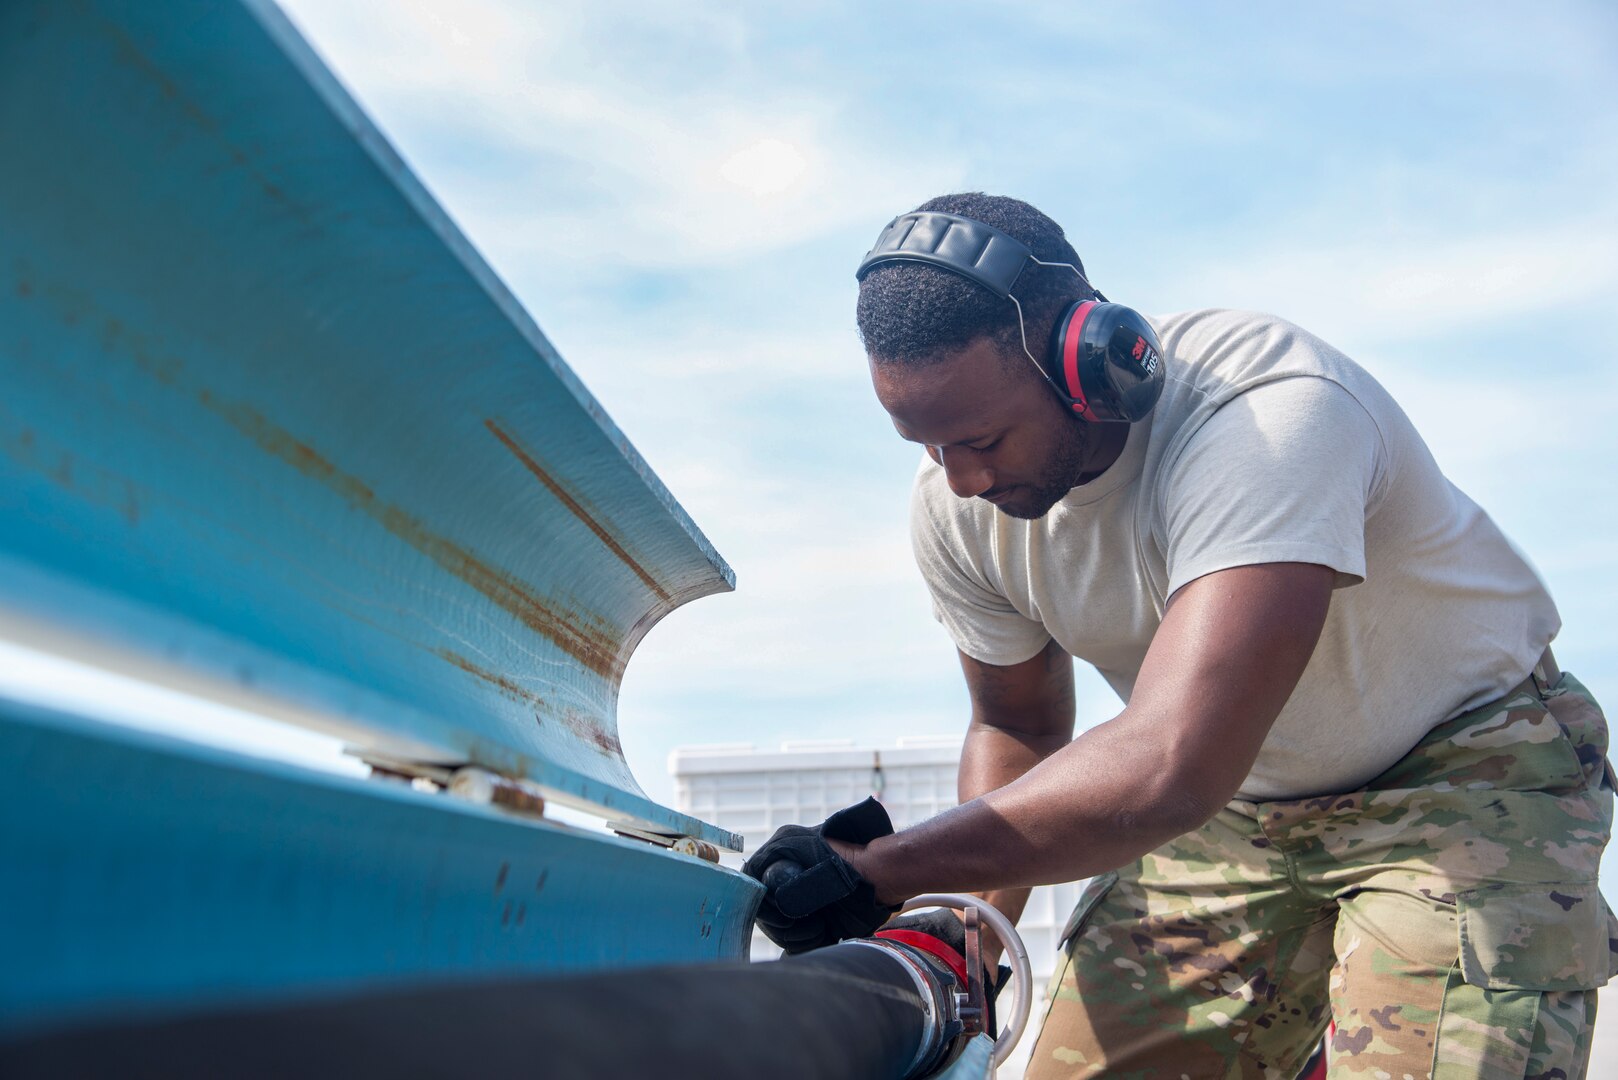 U.S. Air Force Senior Airman Shaquille Roberts, a 6th Logistics Readiness Squadron fuels distribution technician, secures a fuel hose at MacDill Air Force Base, Fla., March 14, 2019.